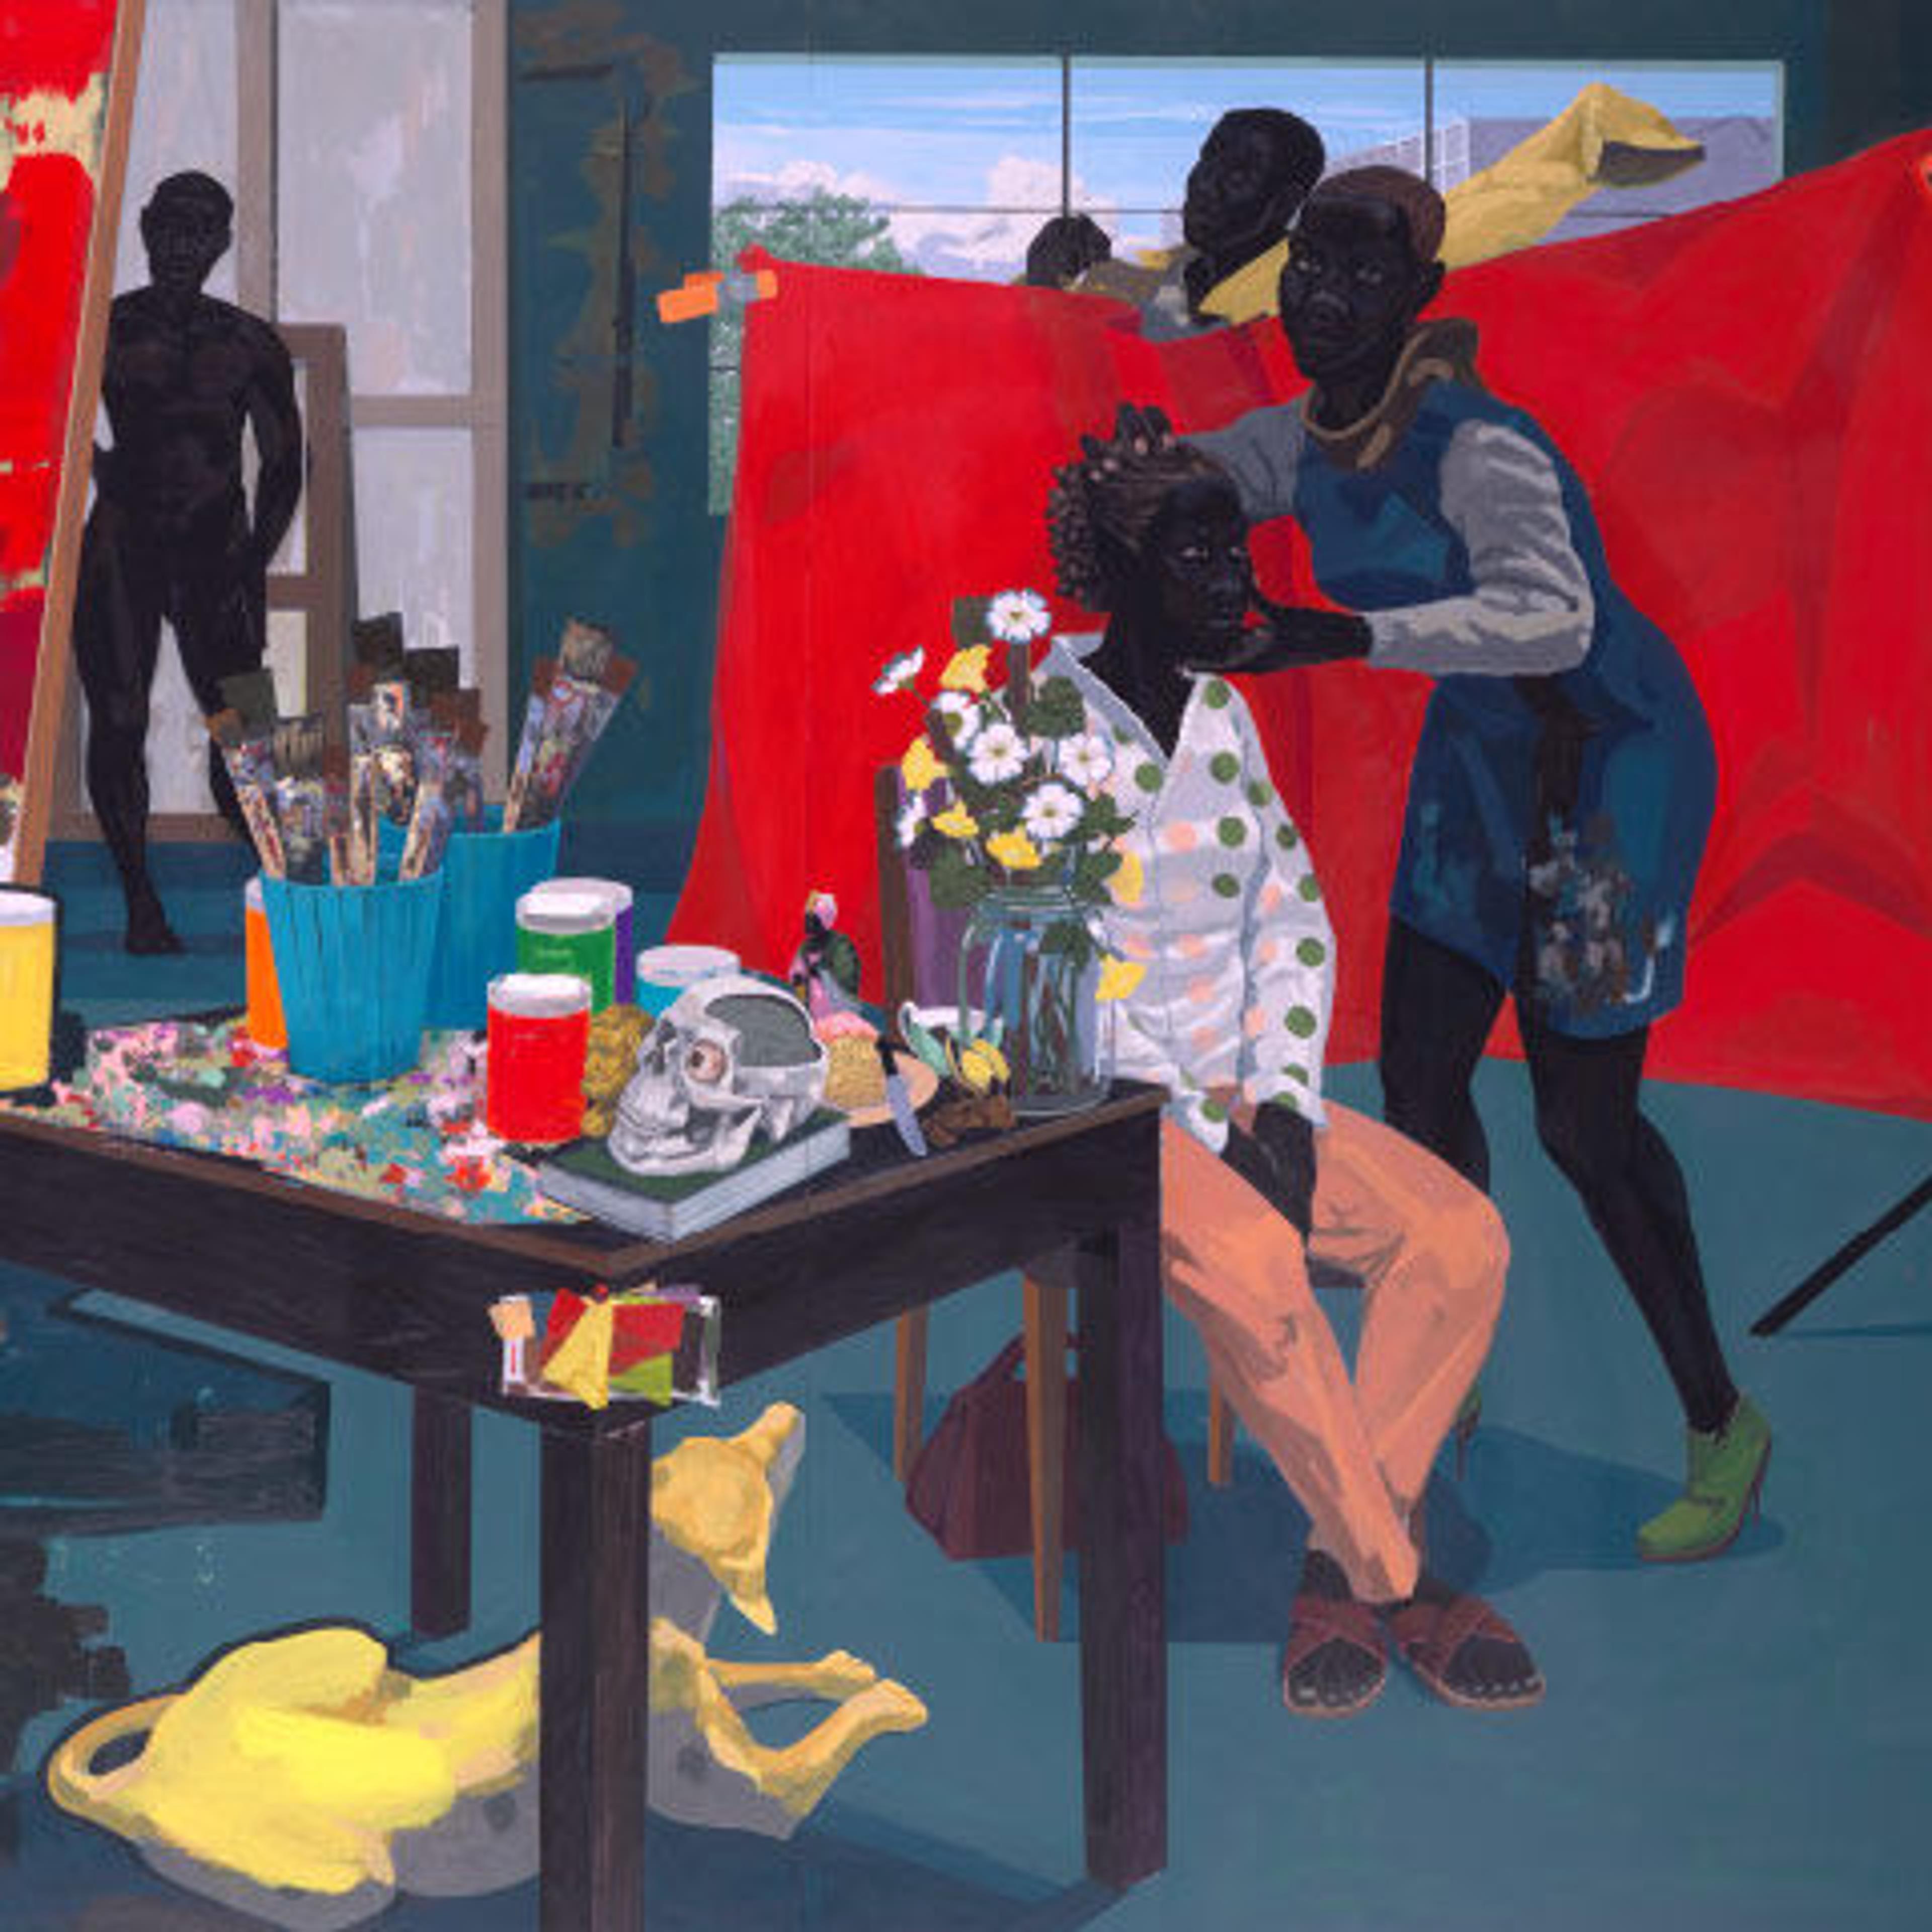 Colorful painting of figures in an art studio